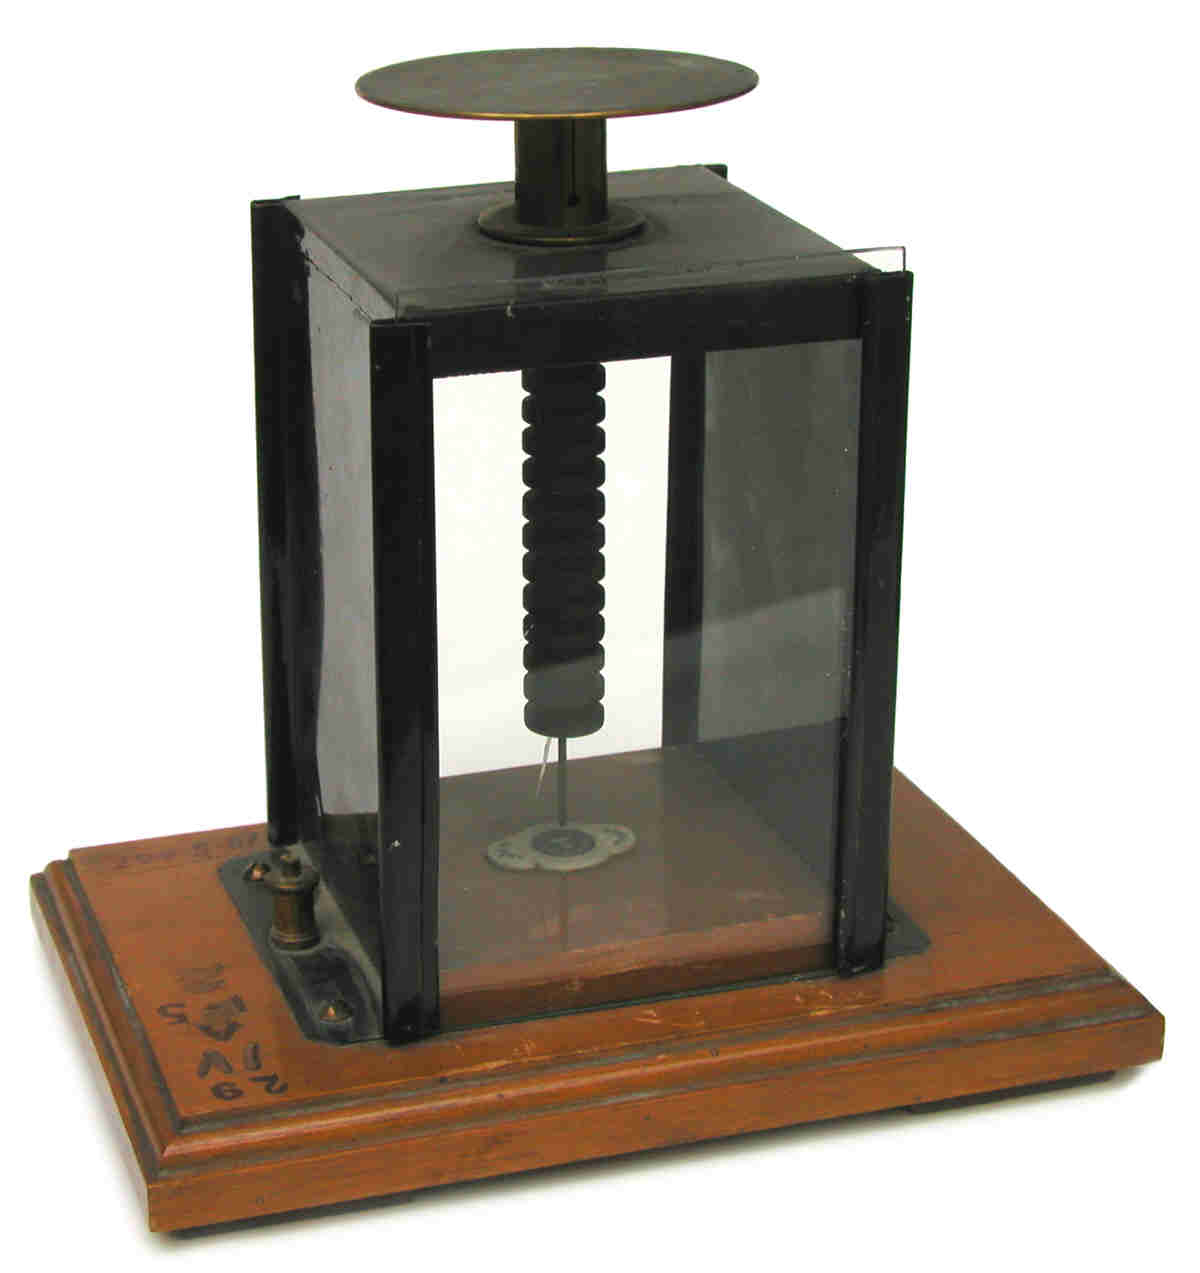 Chatlock's Gold-Leaf Electroscope by Griffin